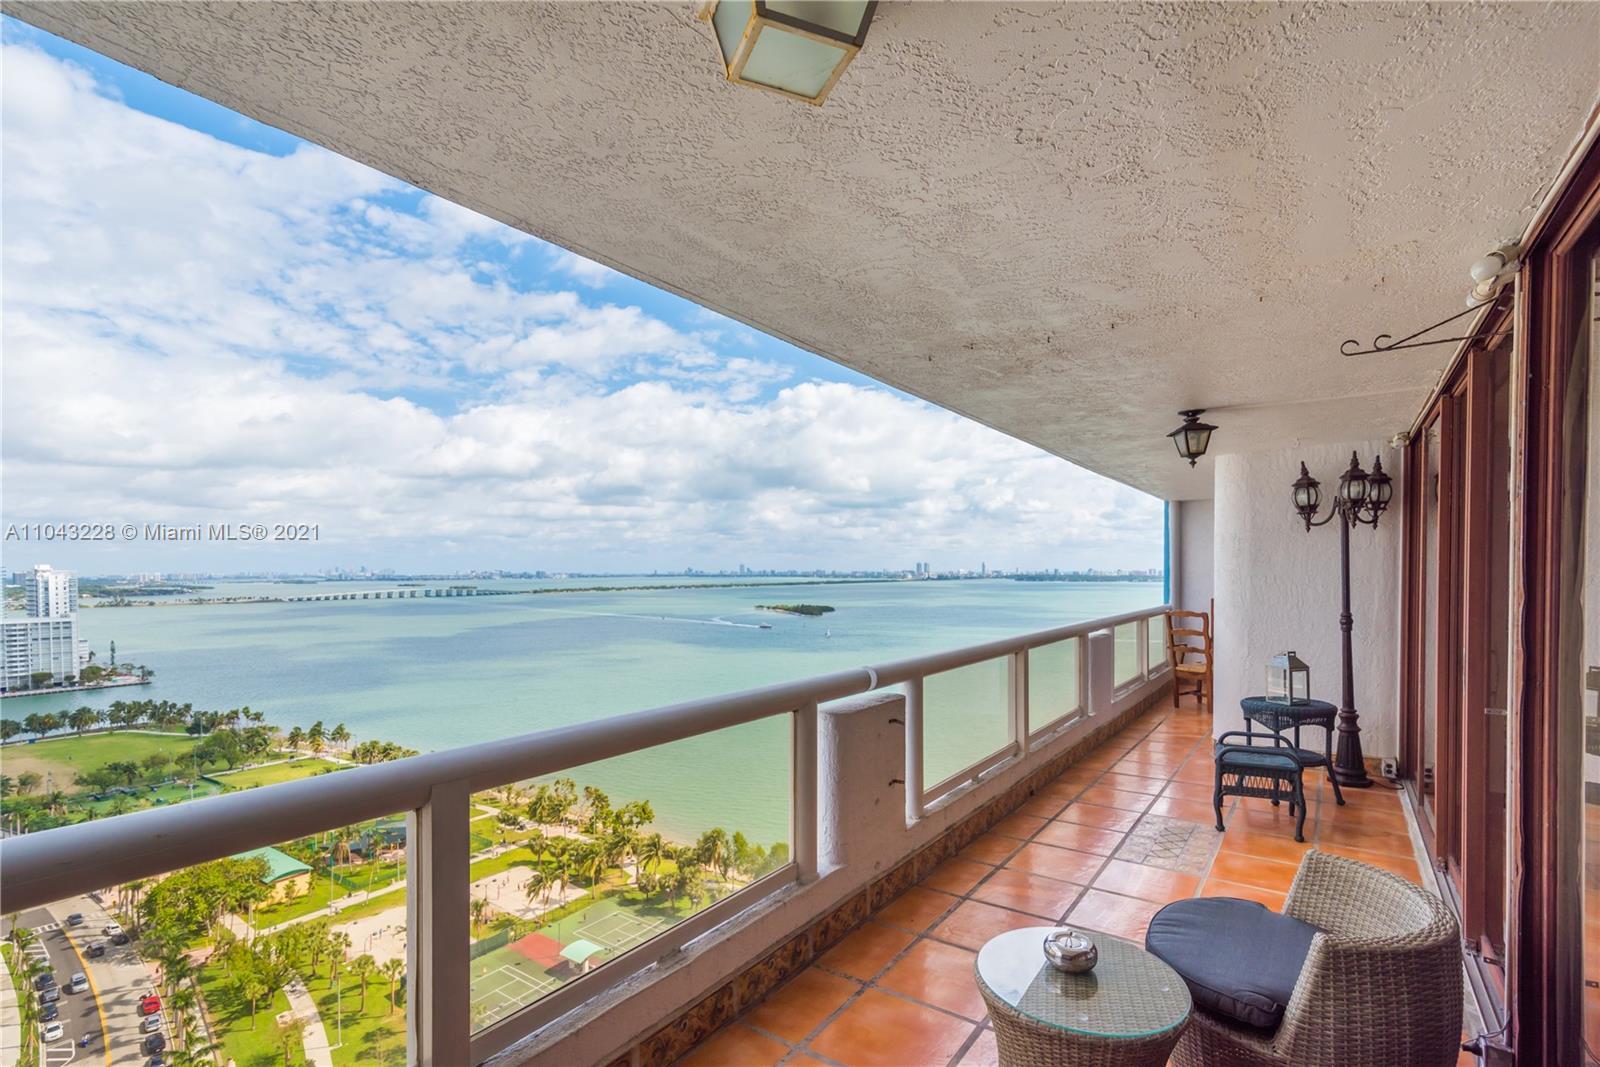 *** Cash Only *** Beautiful WATER VIEWS of Biscayne Bay and the SPECTACULAR MIAMI SKYLINE. Best Deal